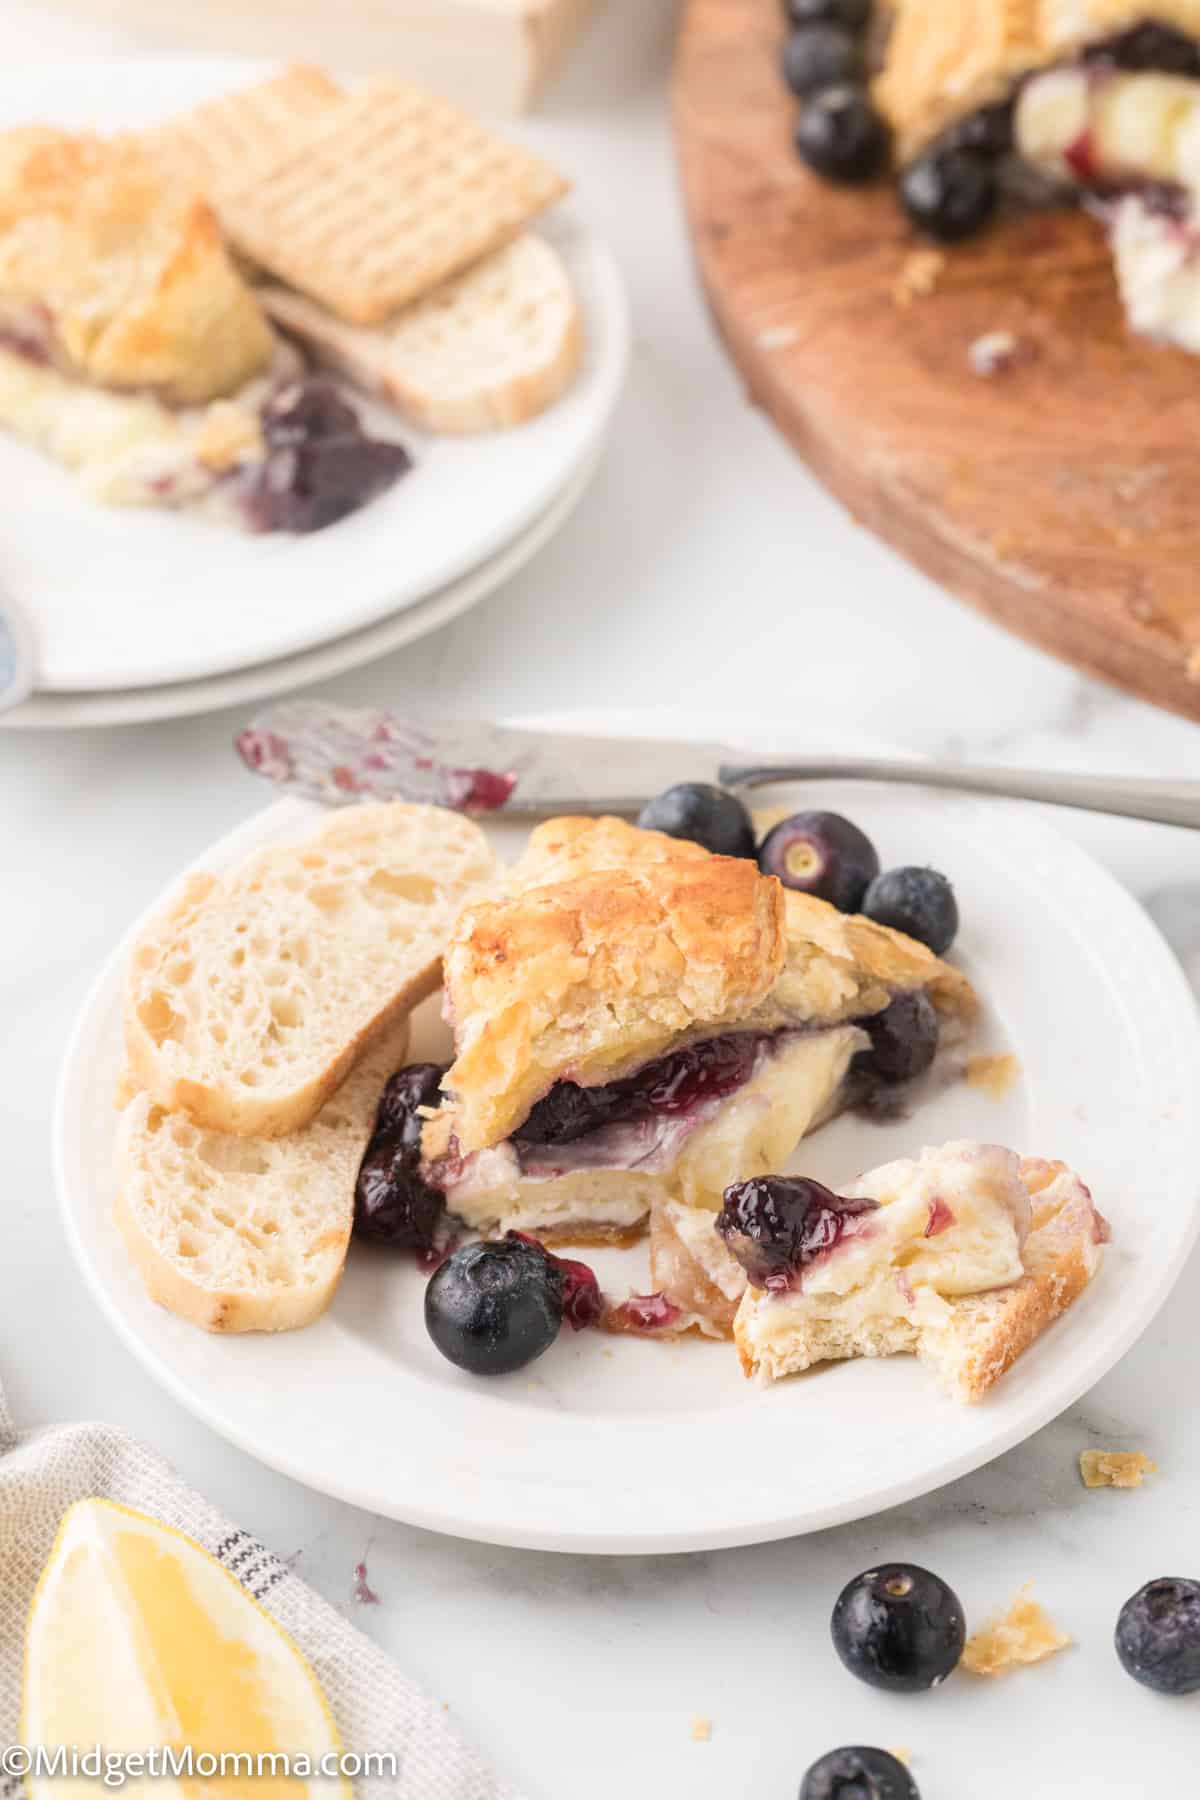 Baked Brie in Puff Pastry with Blueberry Pie Filling served on a plater with crusty bread